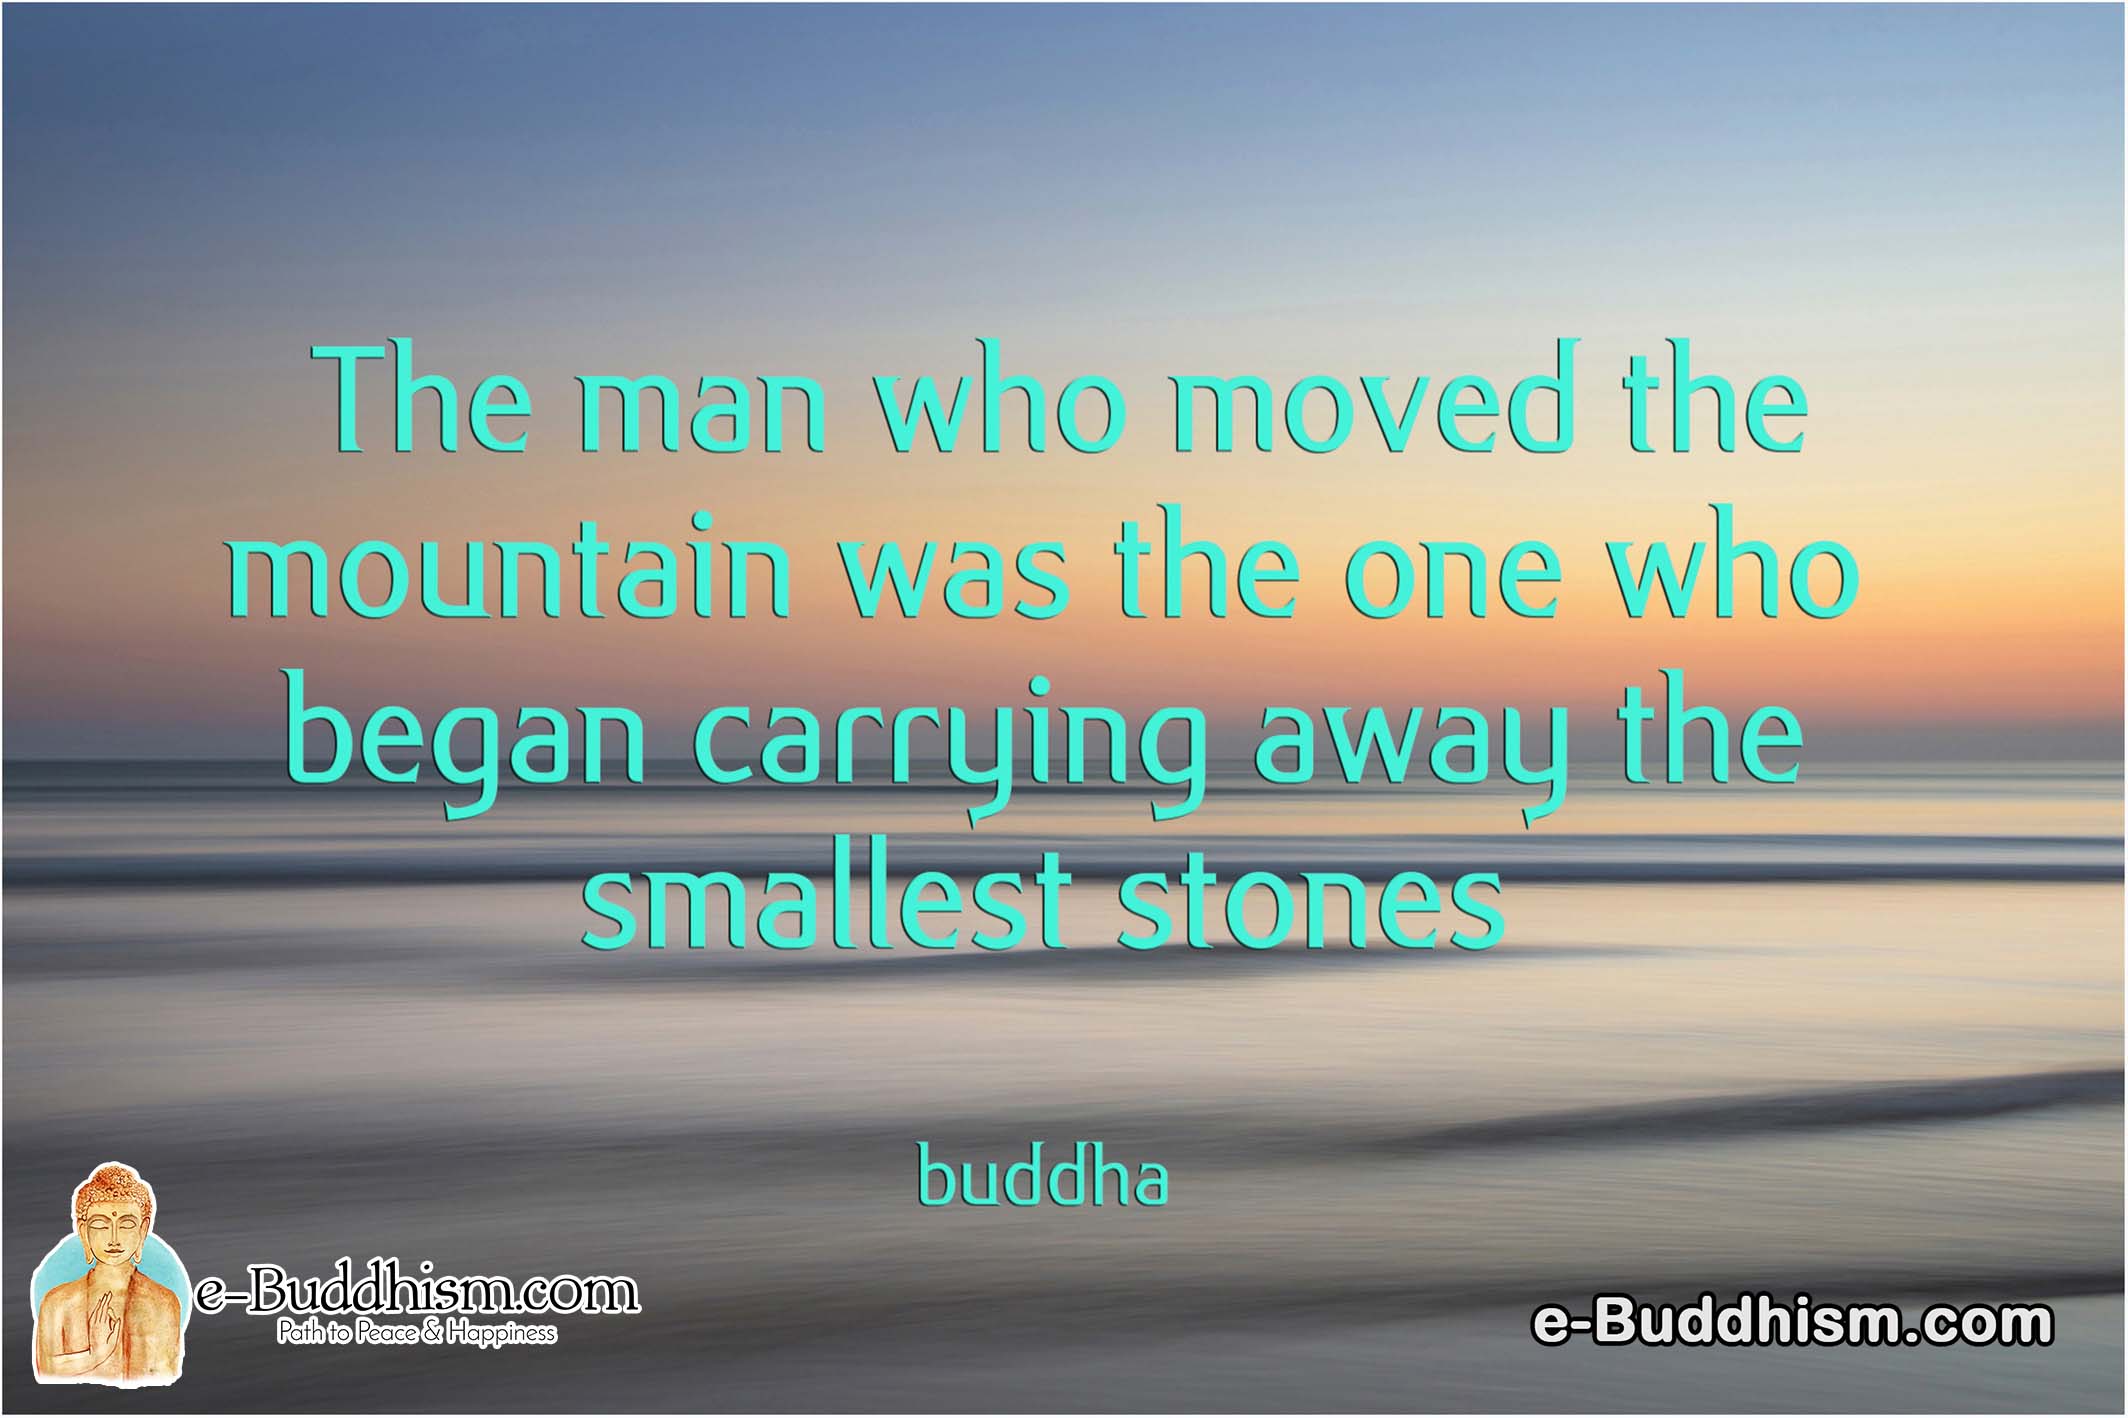 The man who moved the mountain was the one who began carrying away the smallest stones. -Buddha